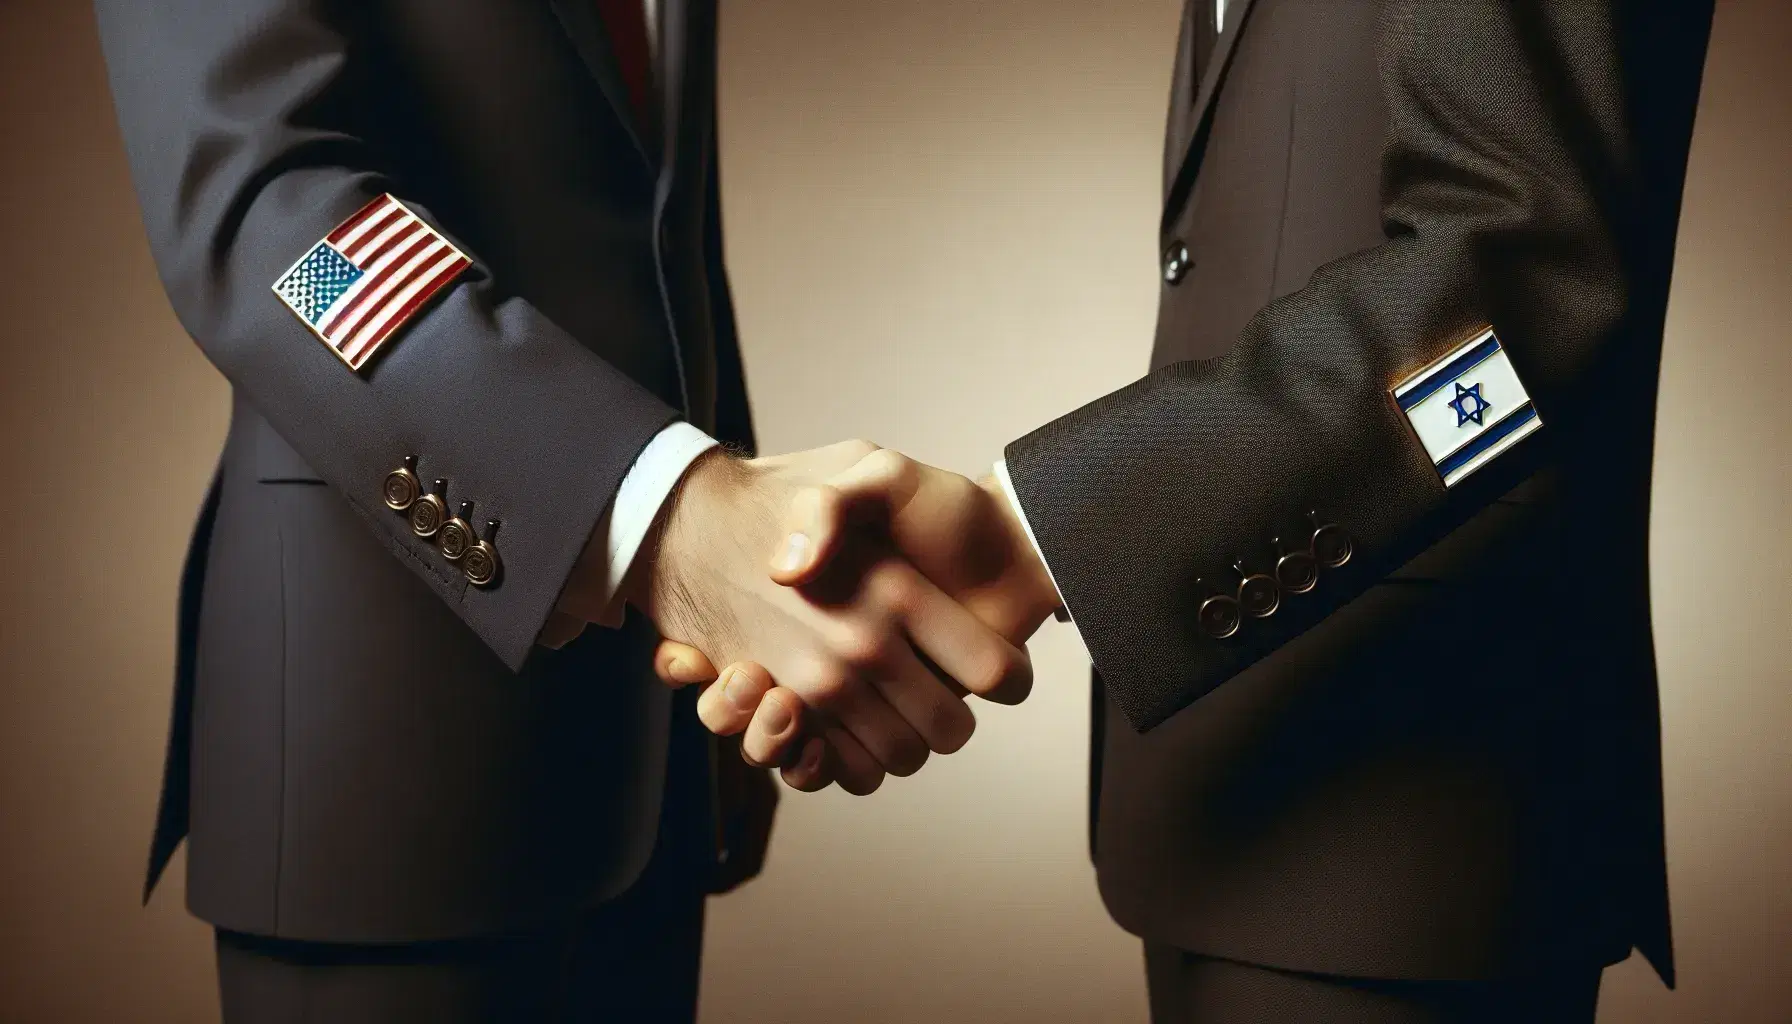 Handshake between two professionals with US and Israeli flag lapel pins, symbolizing diplomatic cooperation, against a neutral beige background.